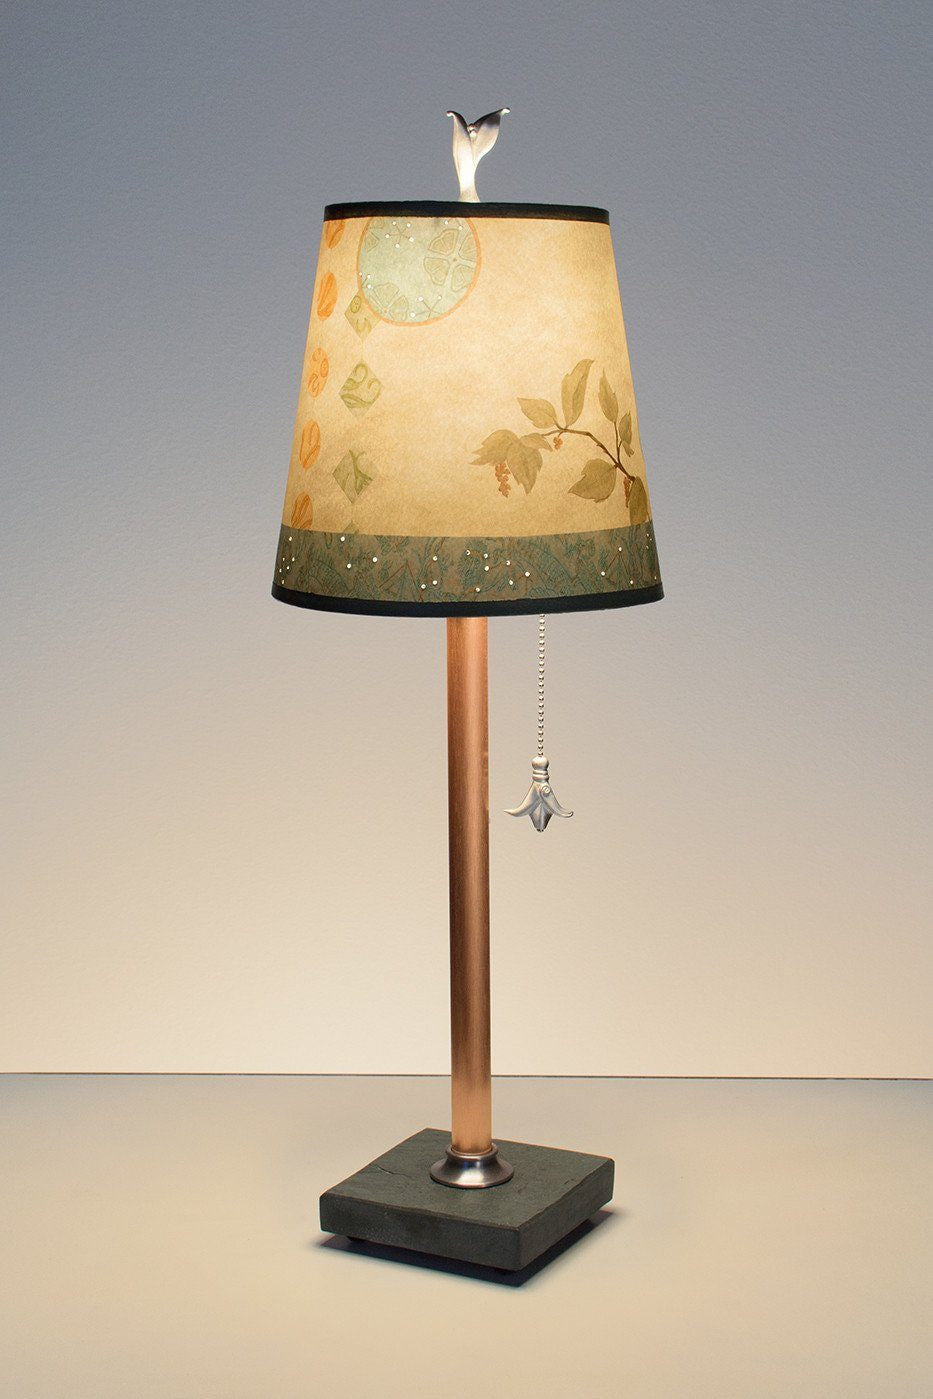 Janna Ugone & Co Table Lamps Copper Table Lamp with Small Drum Shade in Celestial Leaf